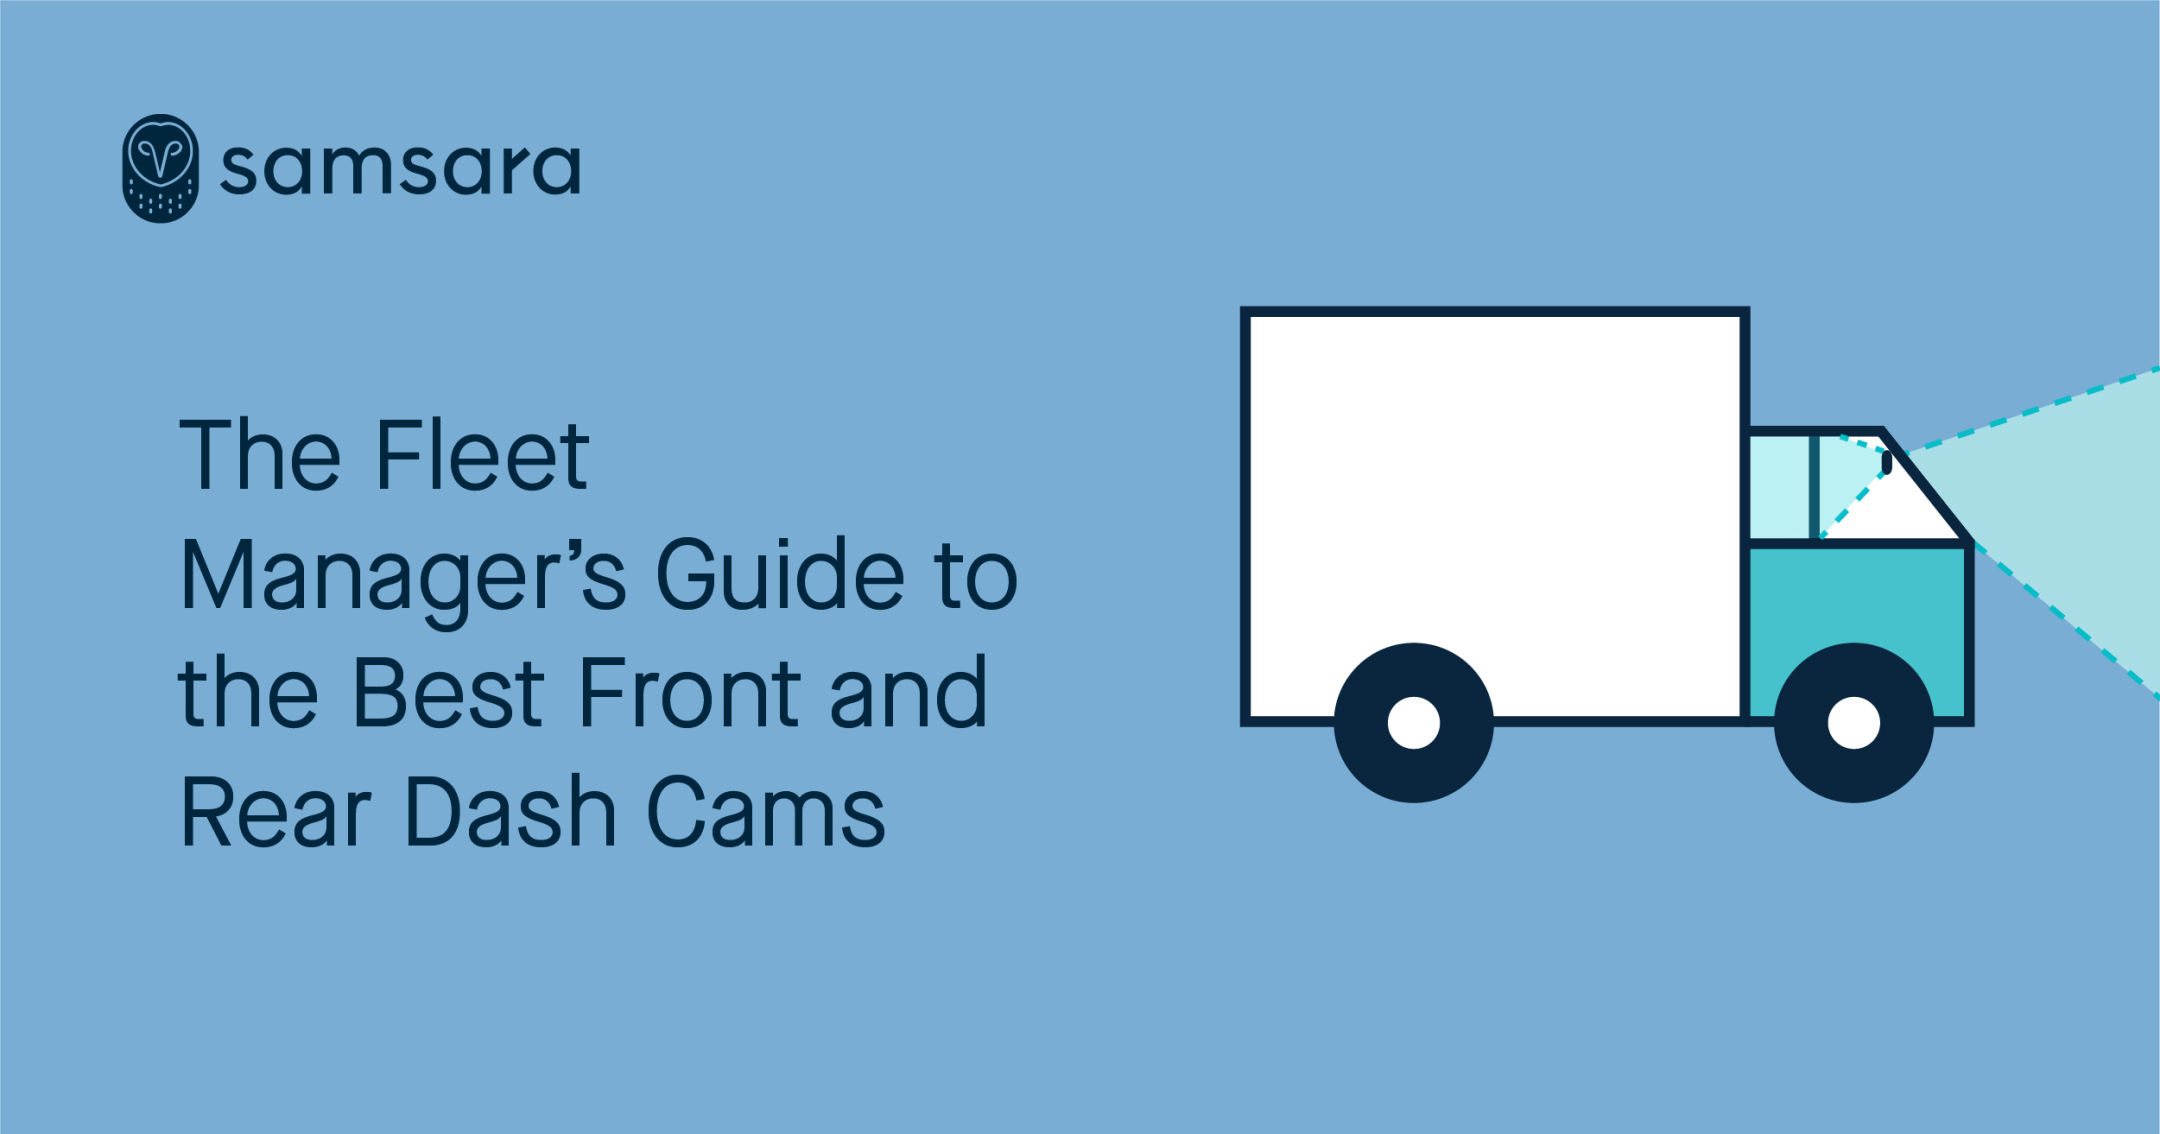 The Fleet Manager’s Guide to the Best Front and Rear Dash Cams